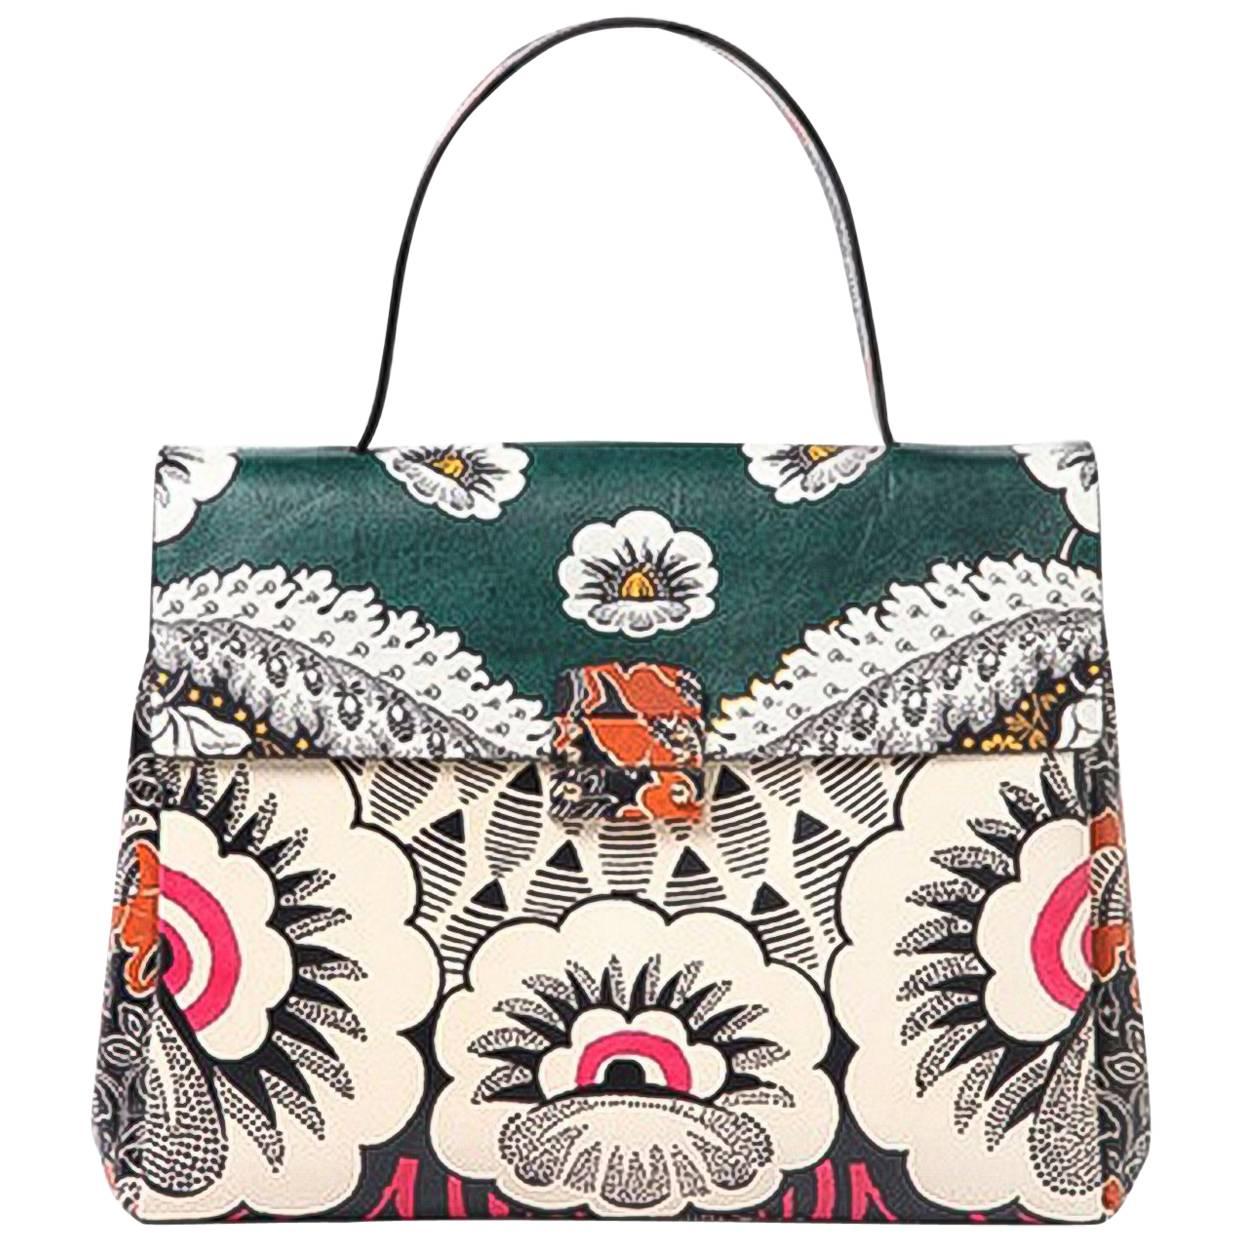 Valentino 2015 Multicolor Floral Print Mime Top Handle Bag rt. $3, 645